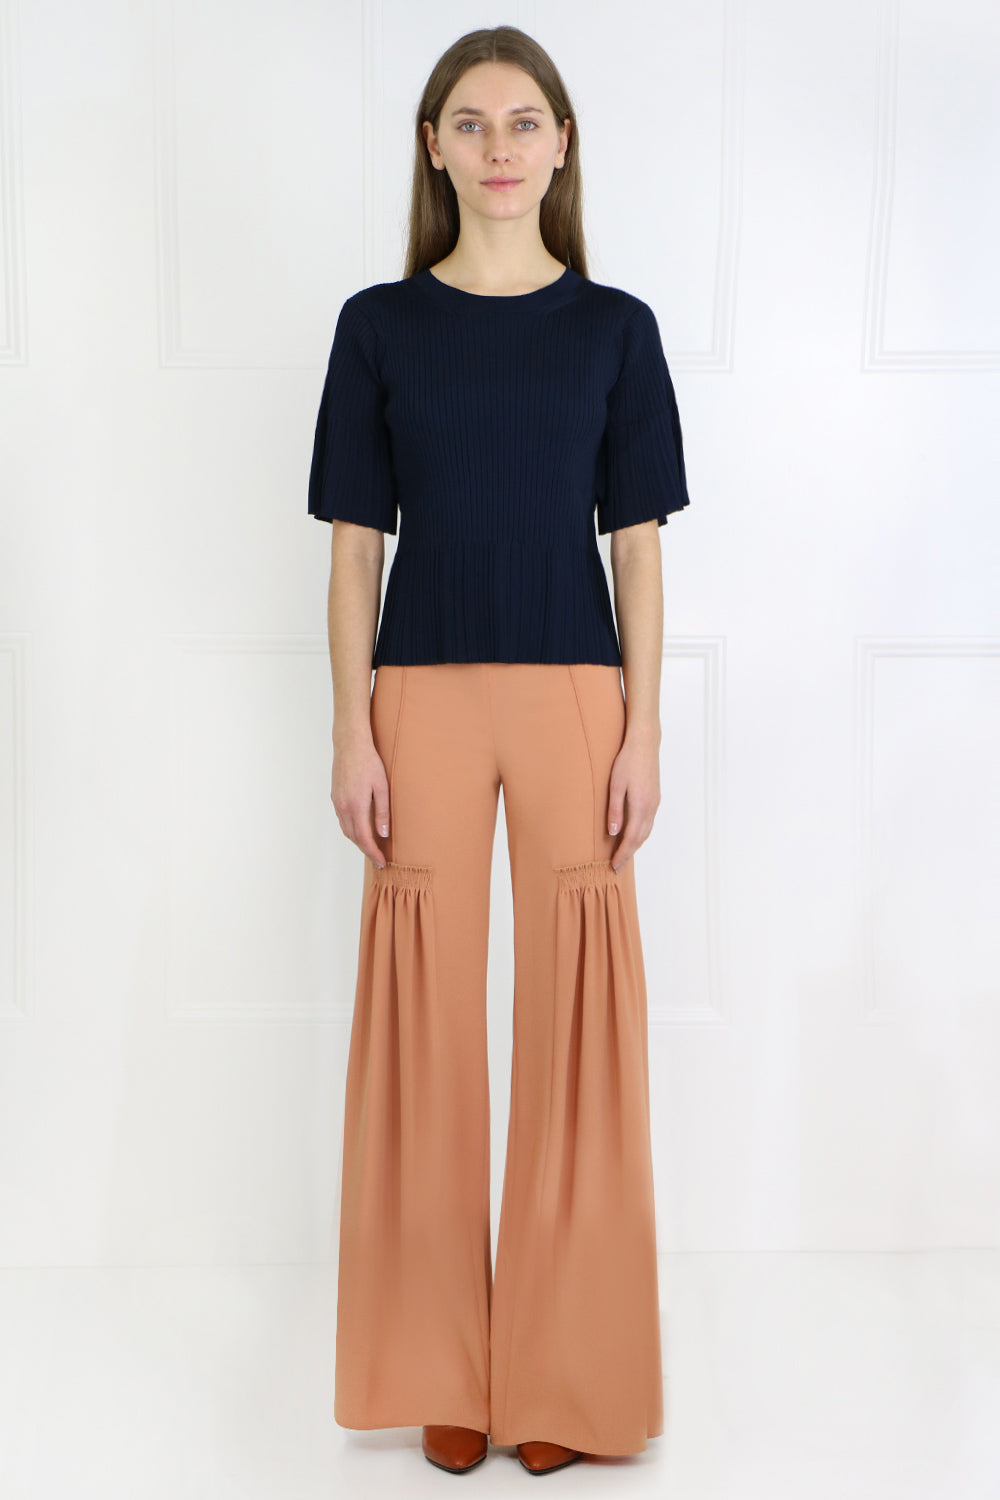 CHLOE RTW FLARED PANTS WITH FRONT PLEAT SUNNY BROWN